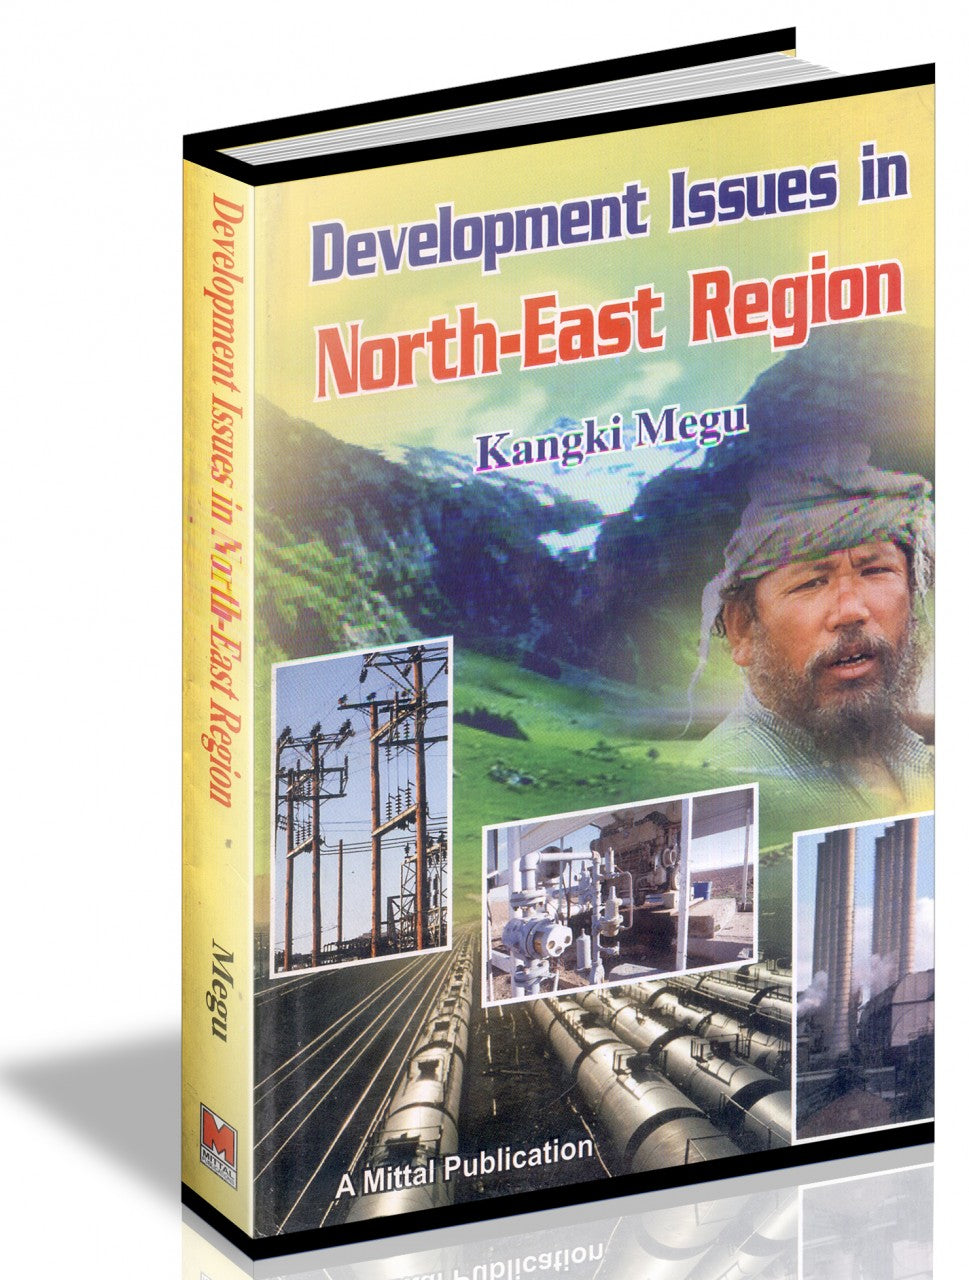 Development Issues in North-East Region